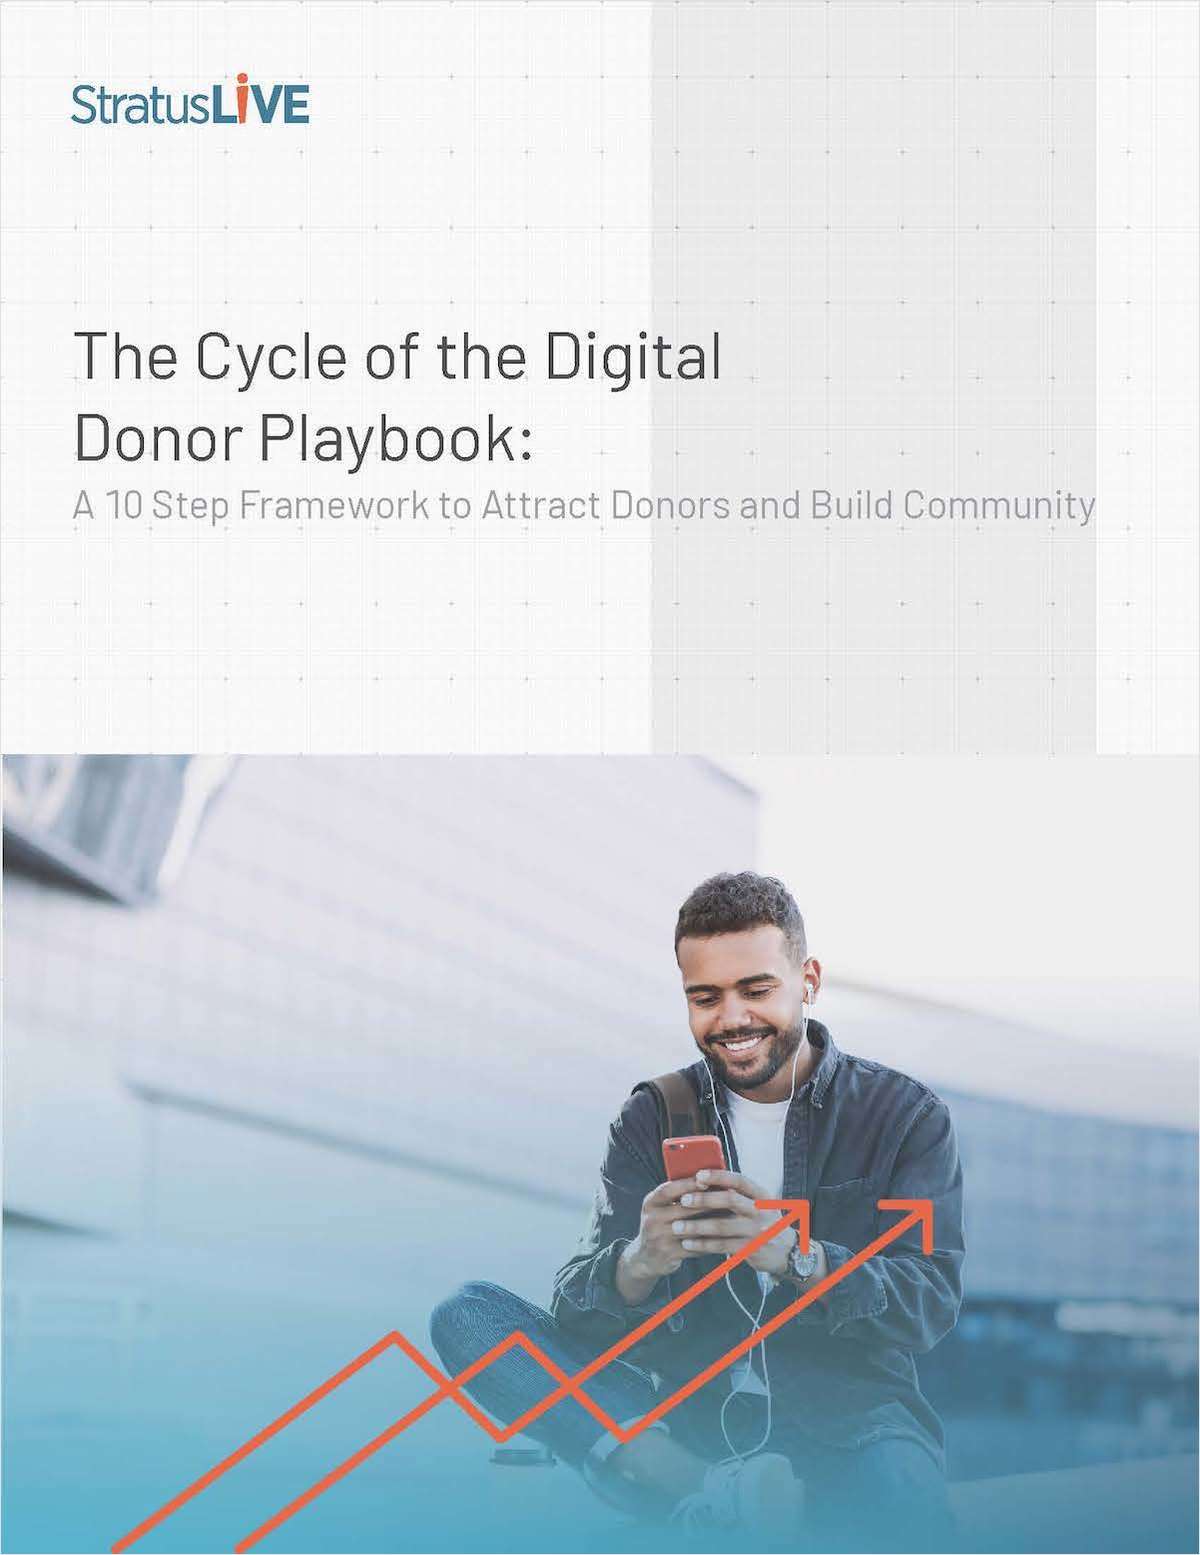 The Cycle of the Digital Donor Playbook